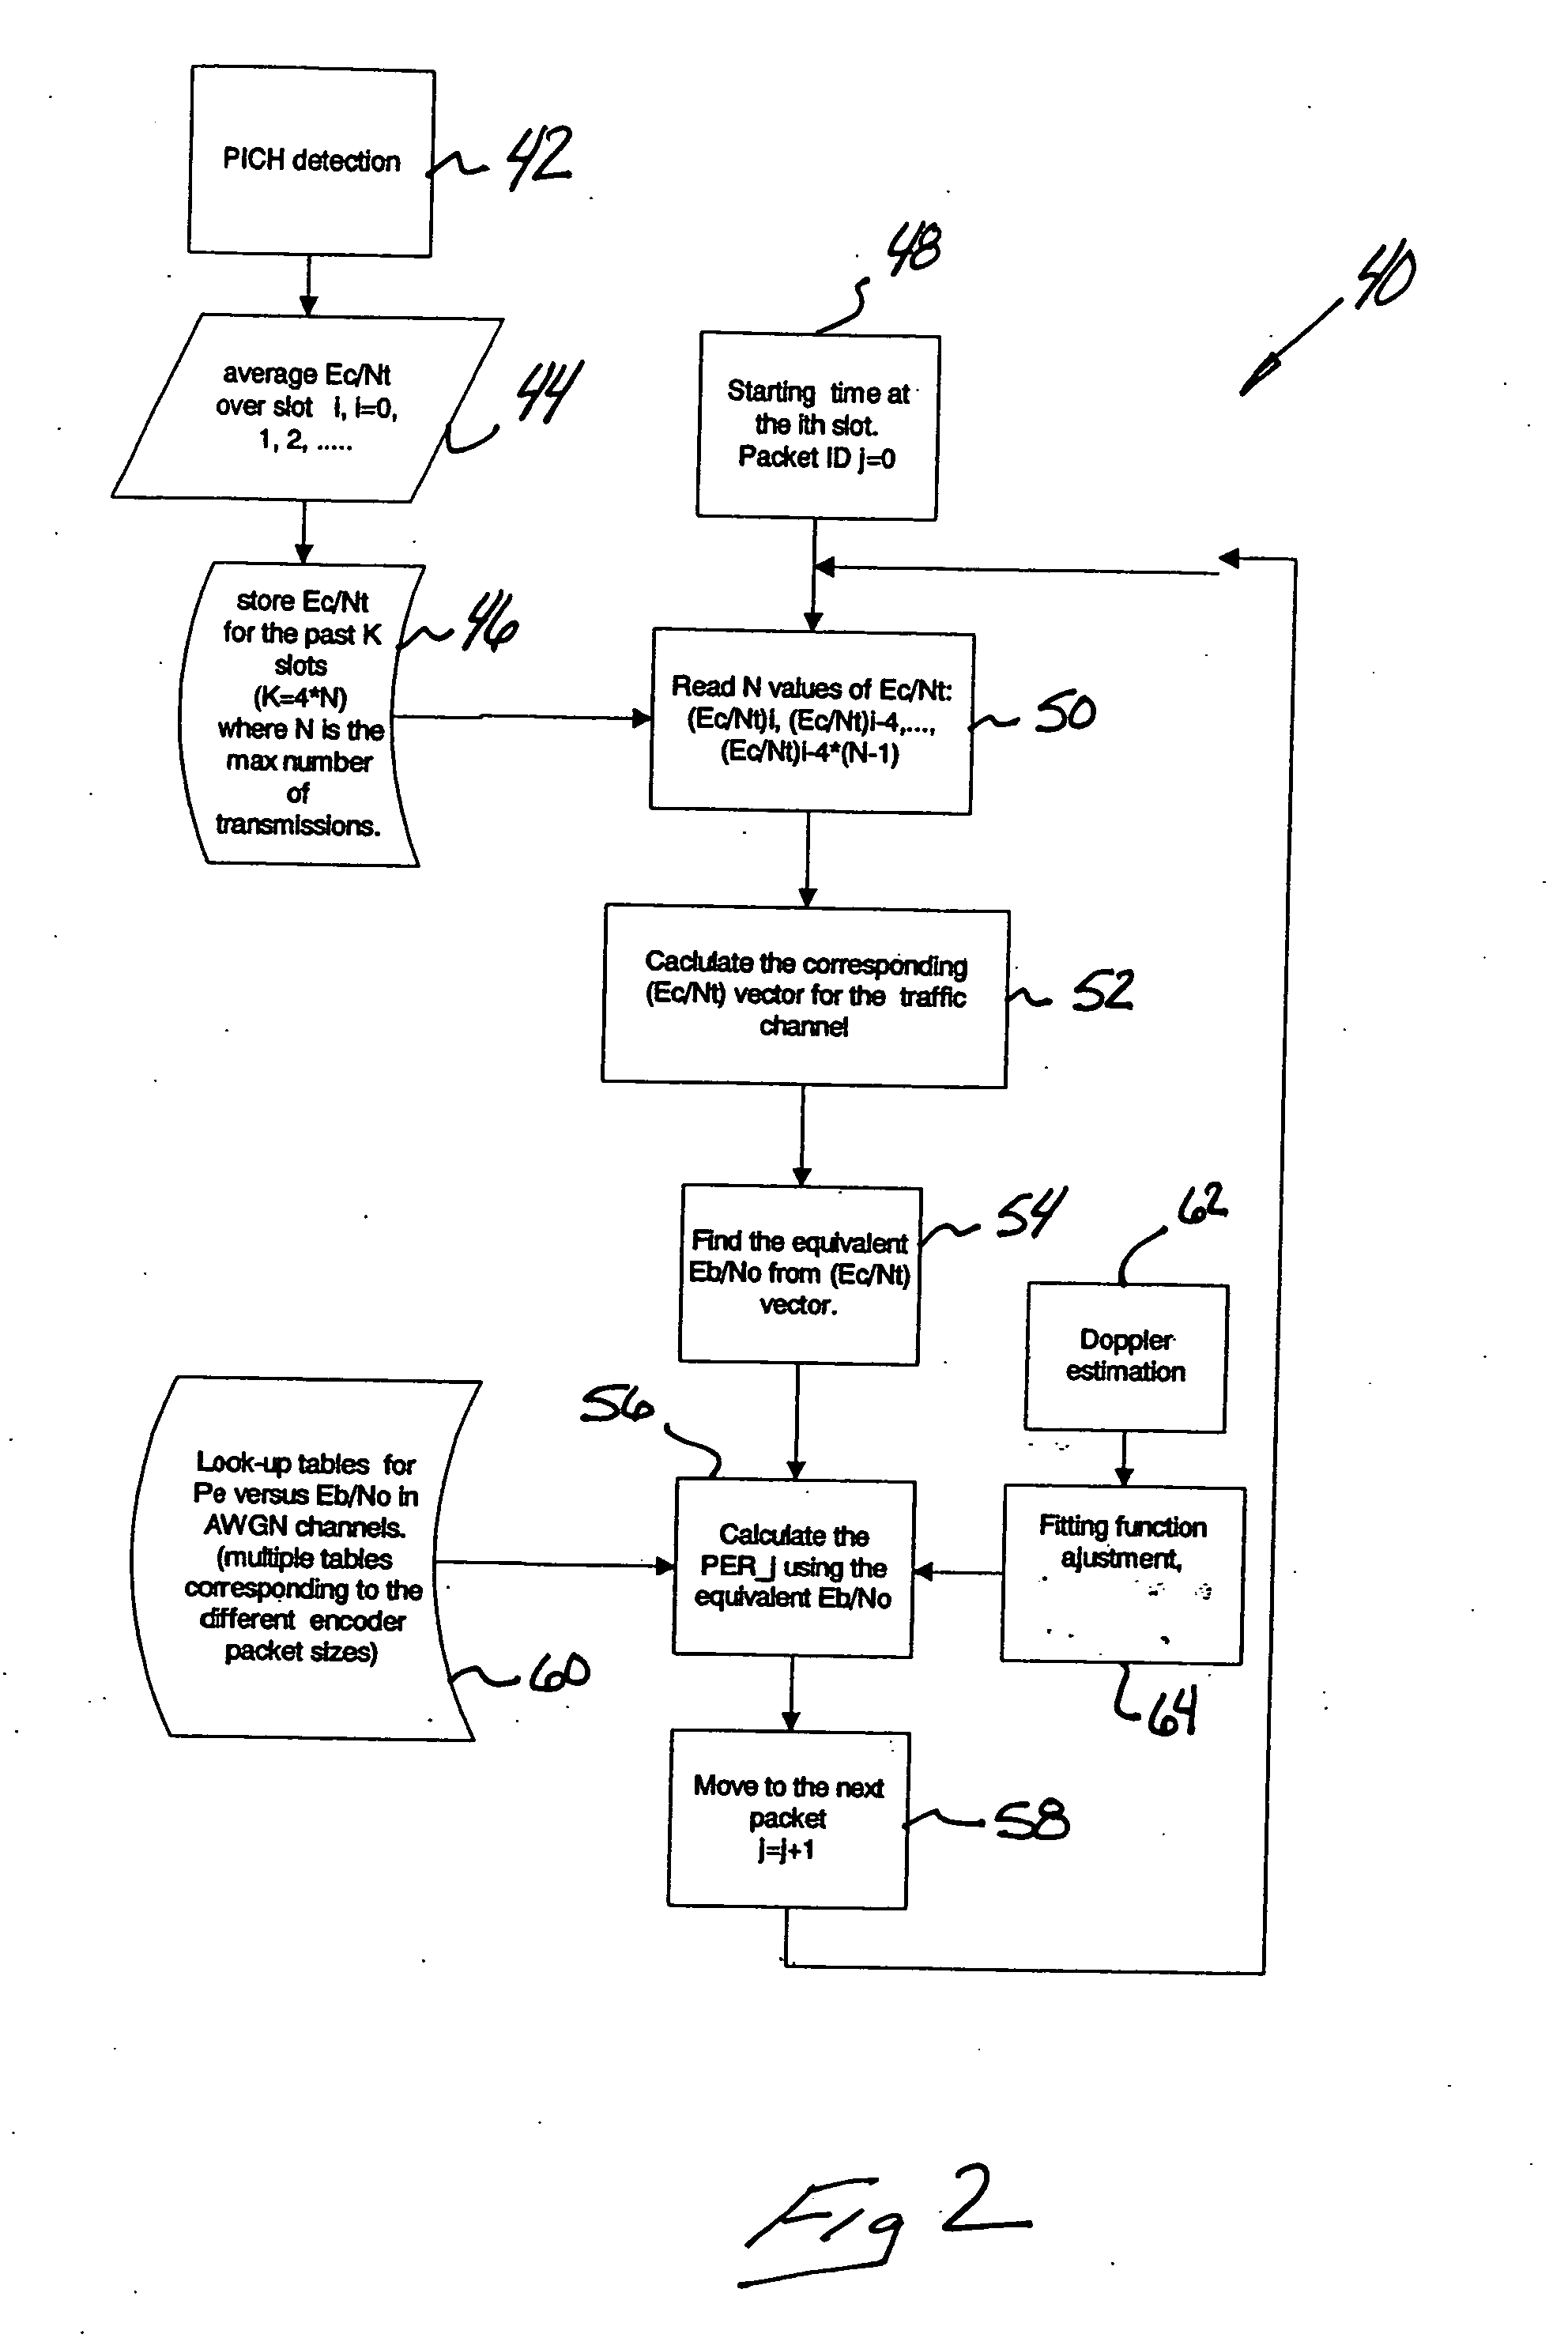 Packet error rate estimation in a communication system